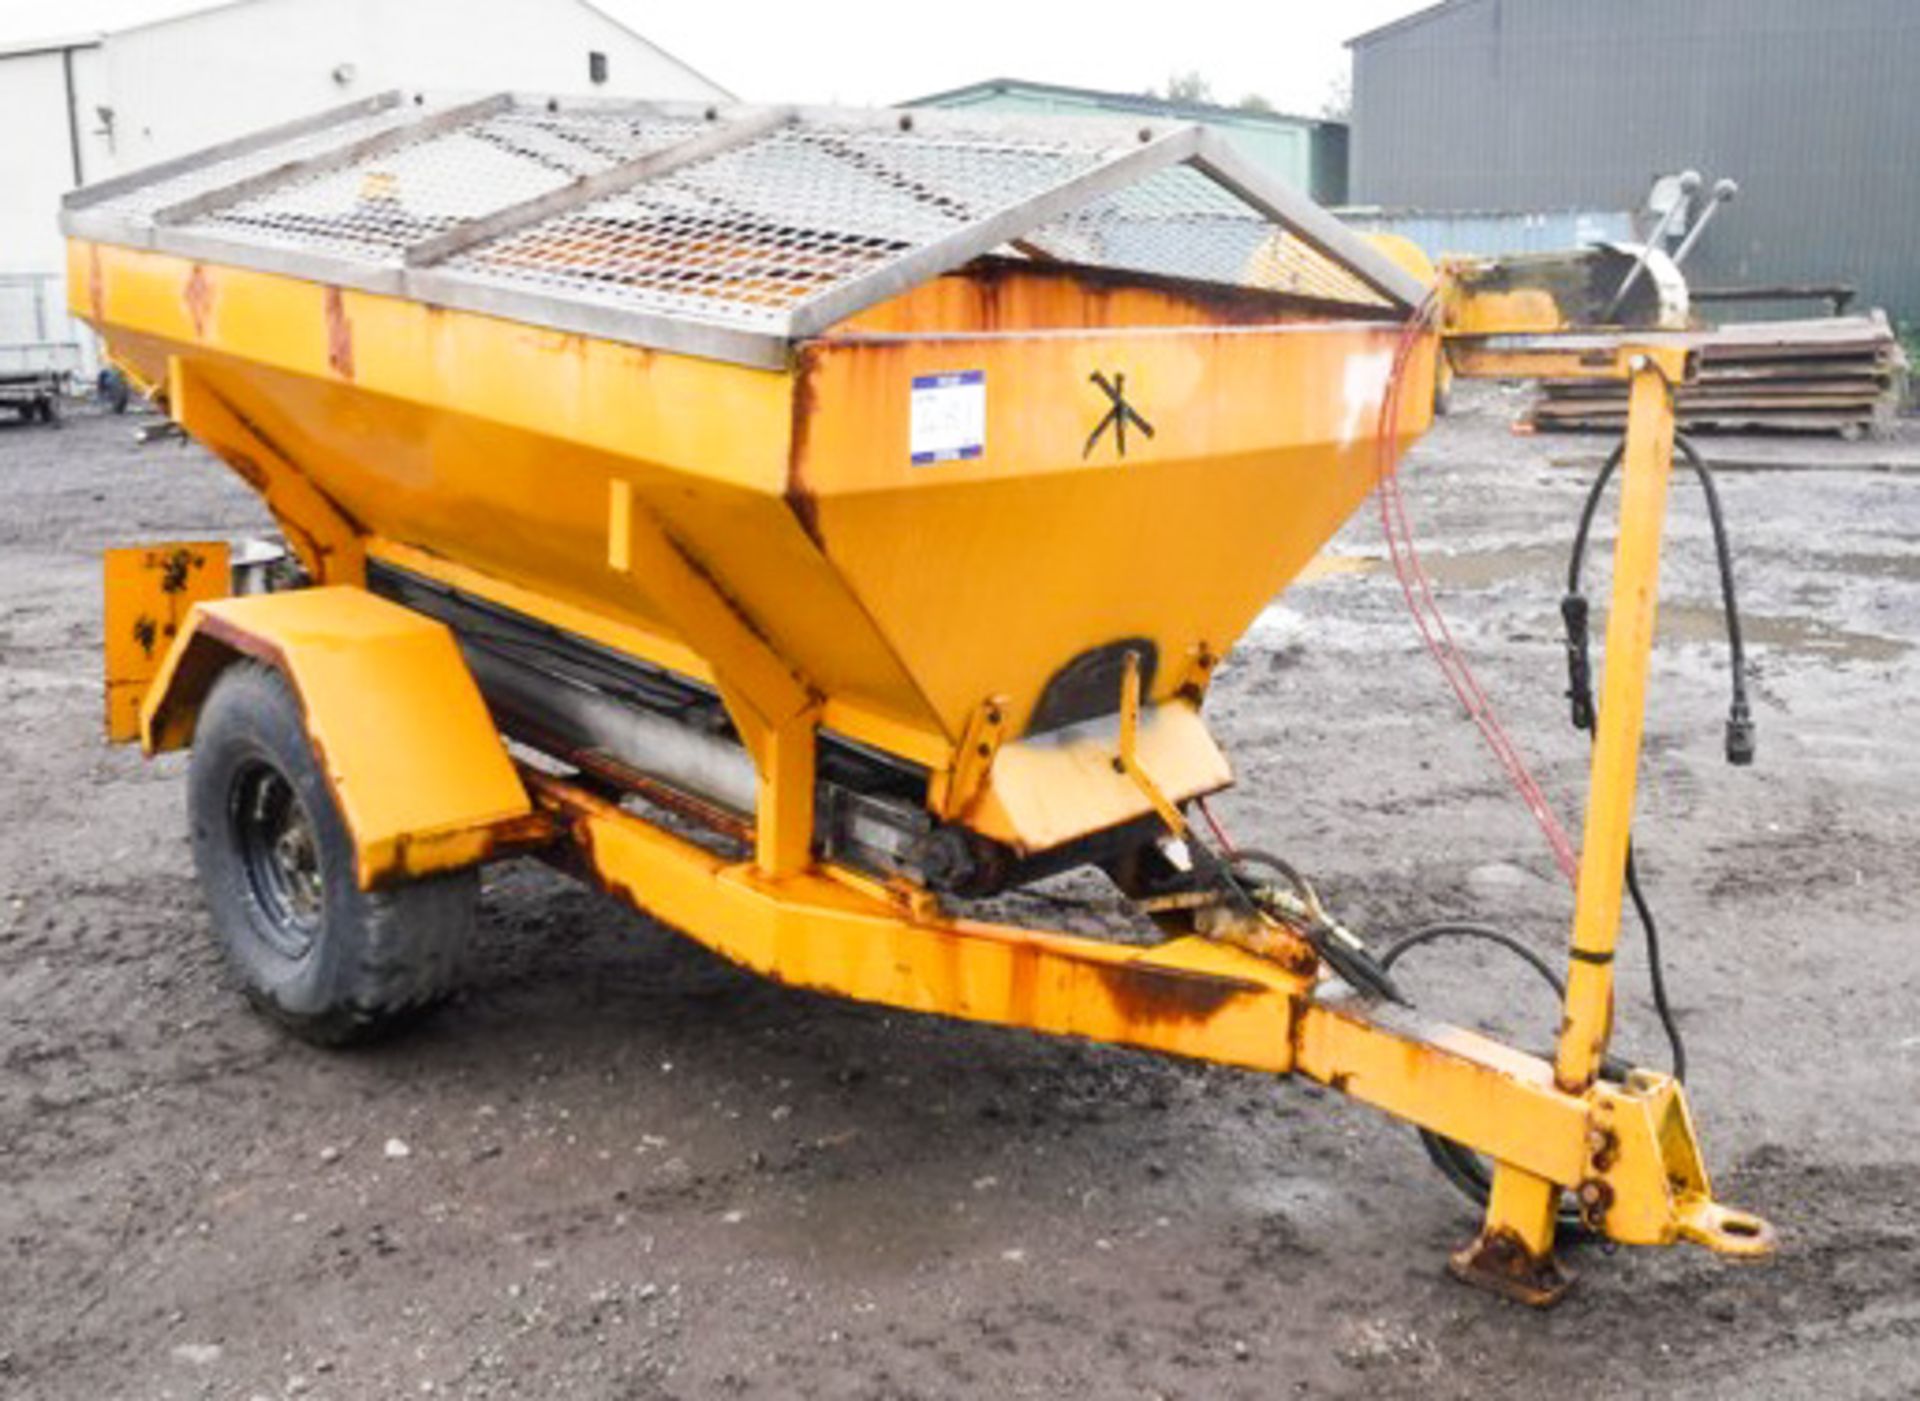 2002 CUTHBERTSON SINGLE AXLE TOWABLE GRITTER, APPROX 5 TON CAPACITY, ASSET NO 3884